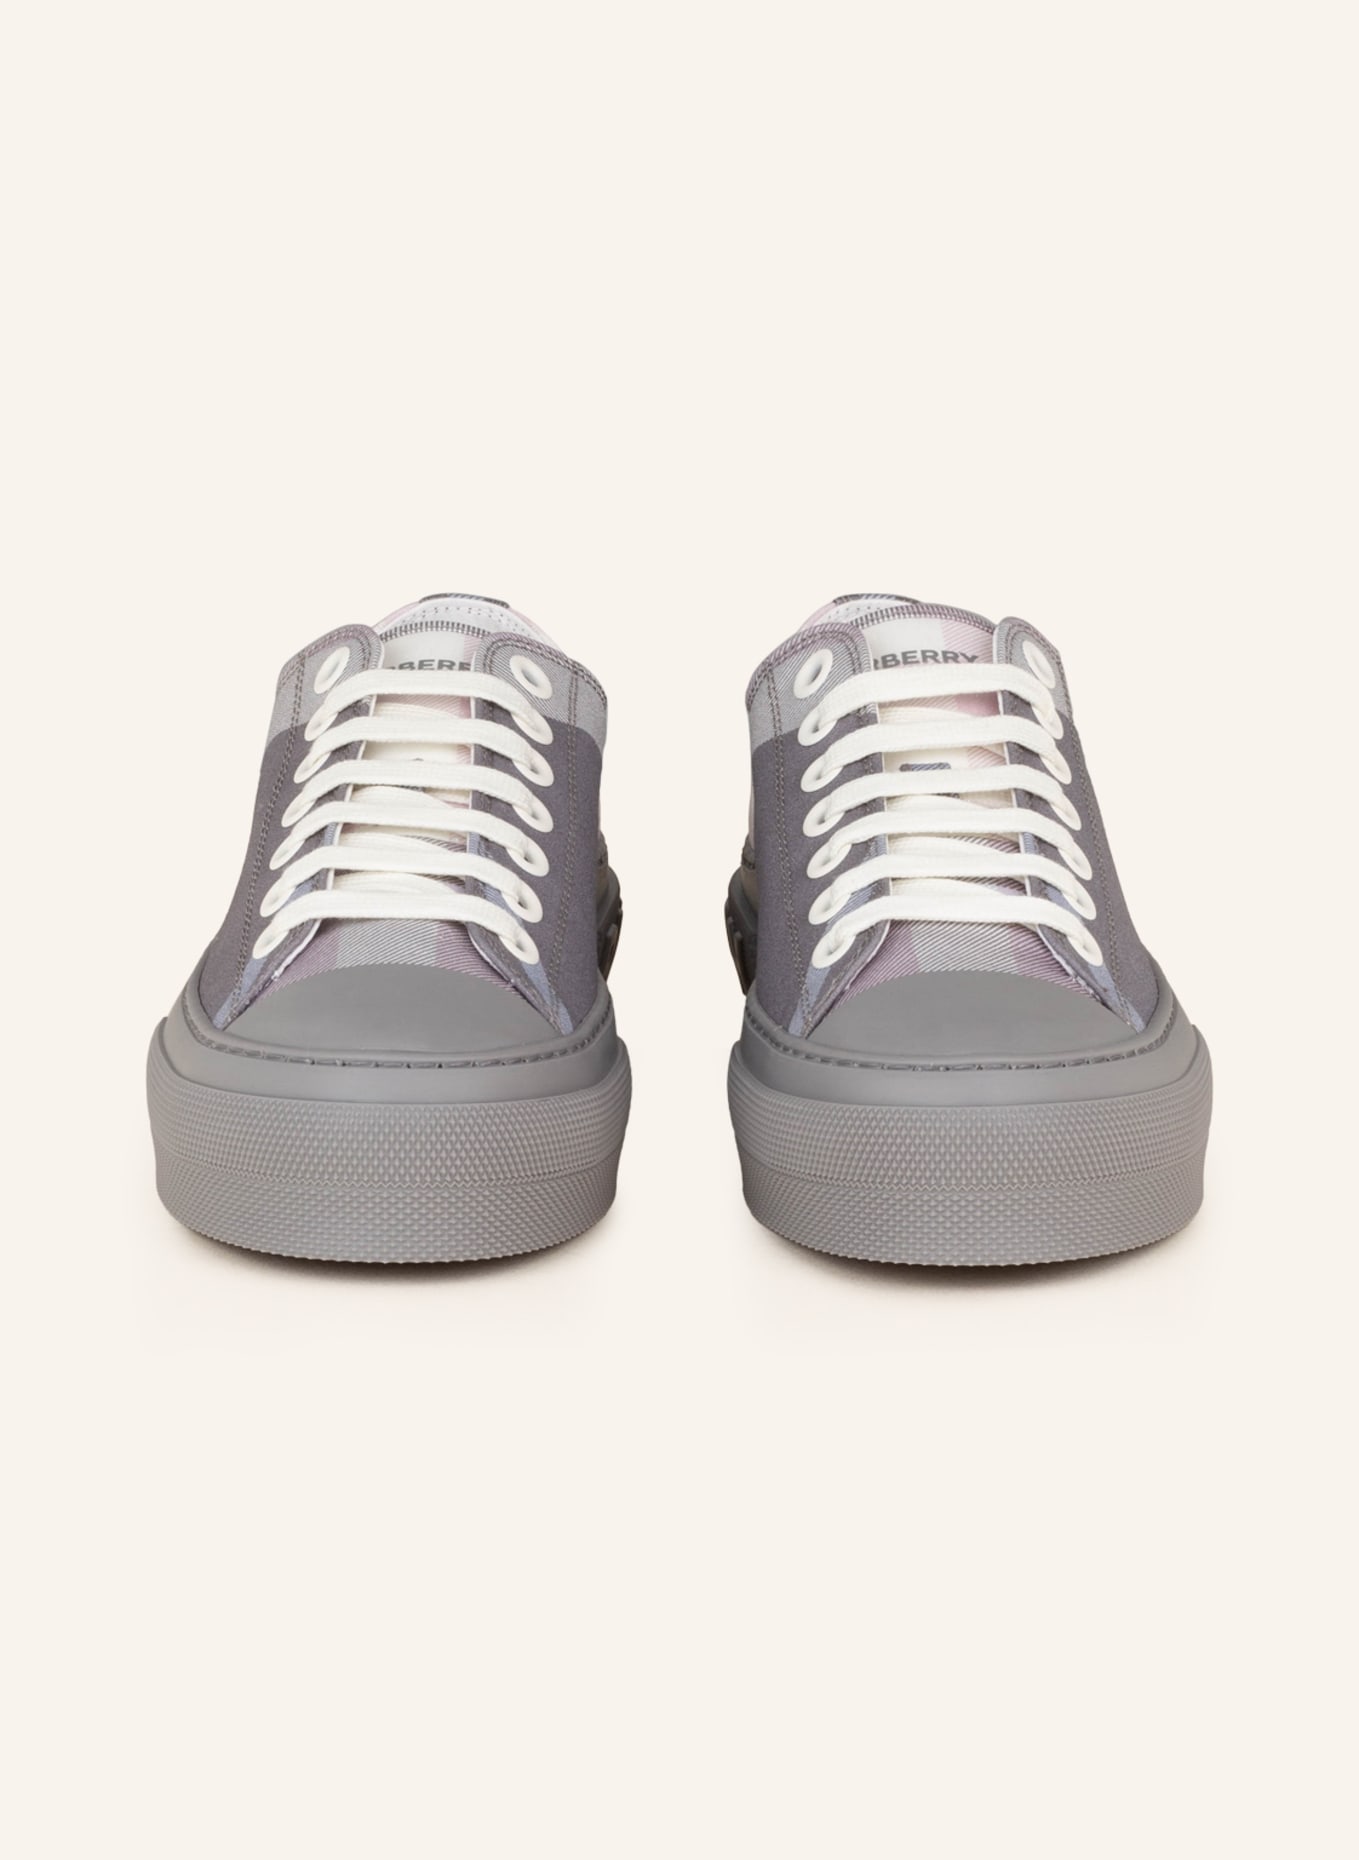 BURBERRY Sneakers JACK , Color: GRAY/ LIGHT GRAY/ LIGHT PINK (Image 3)